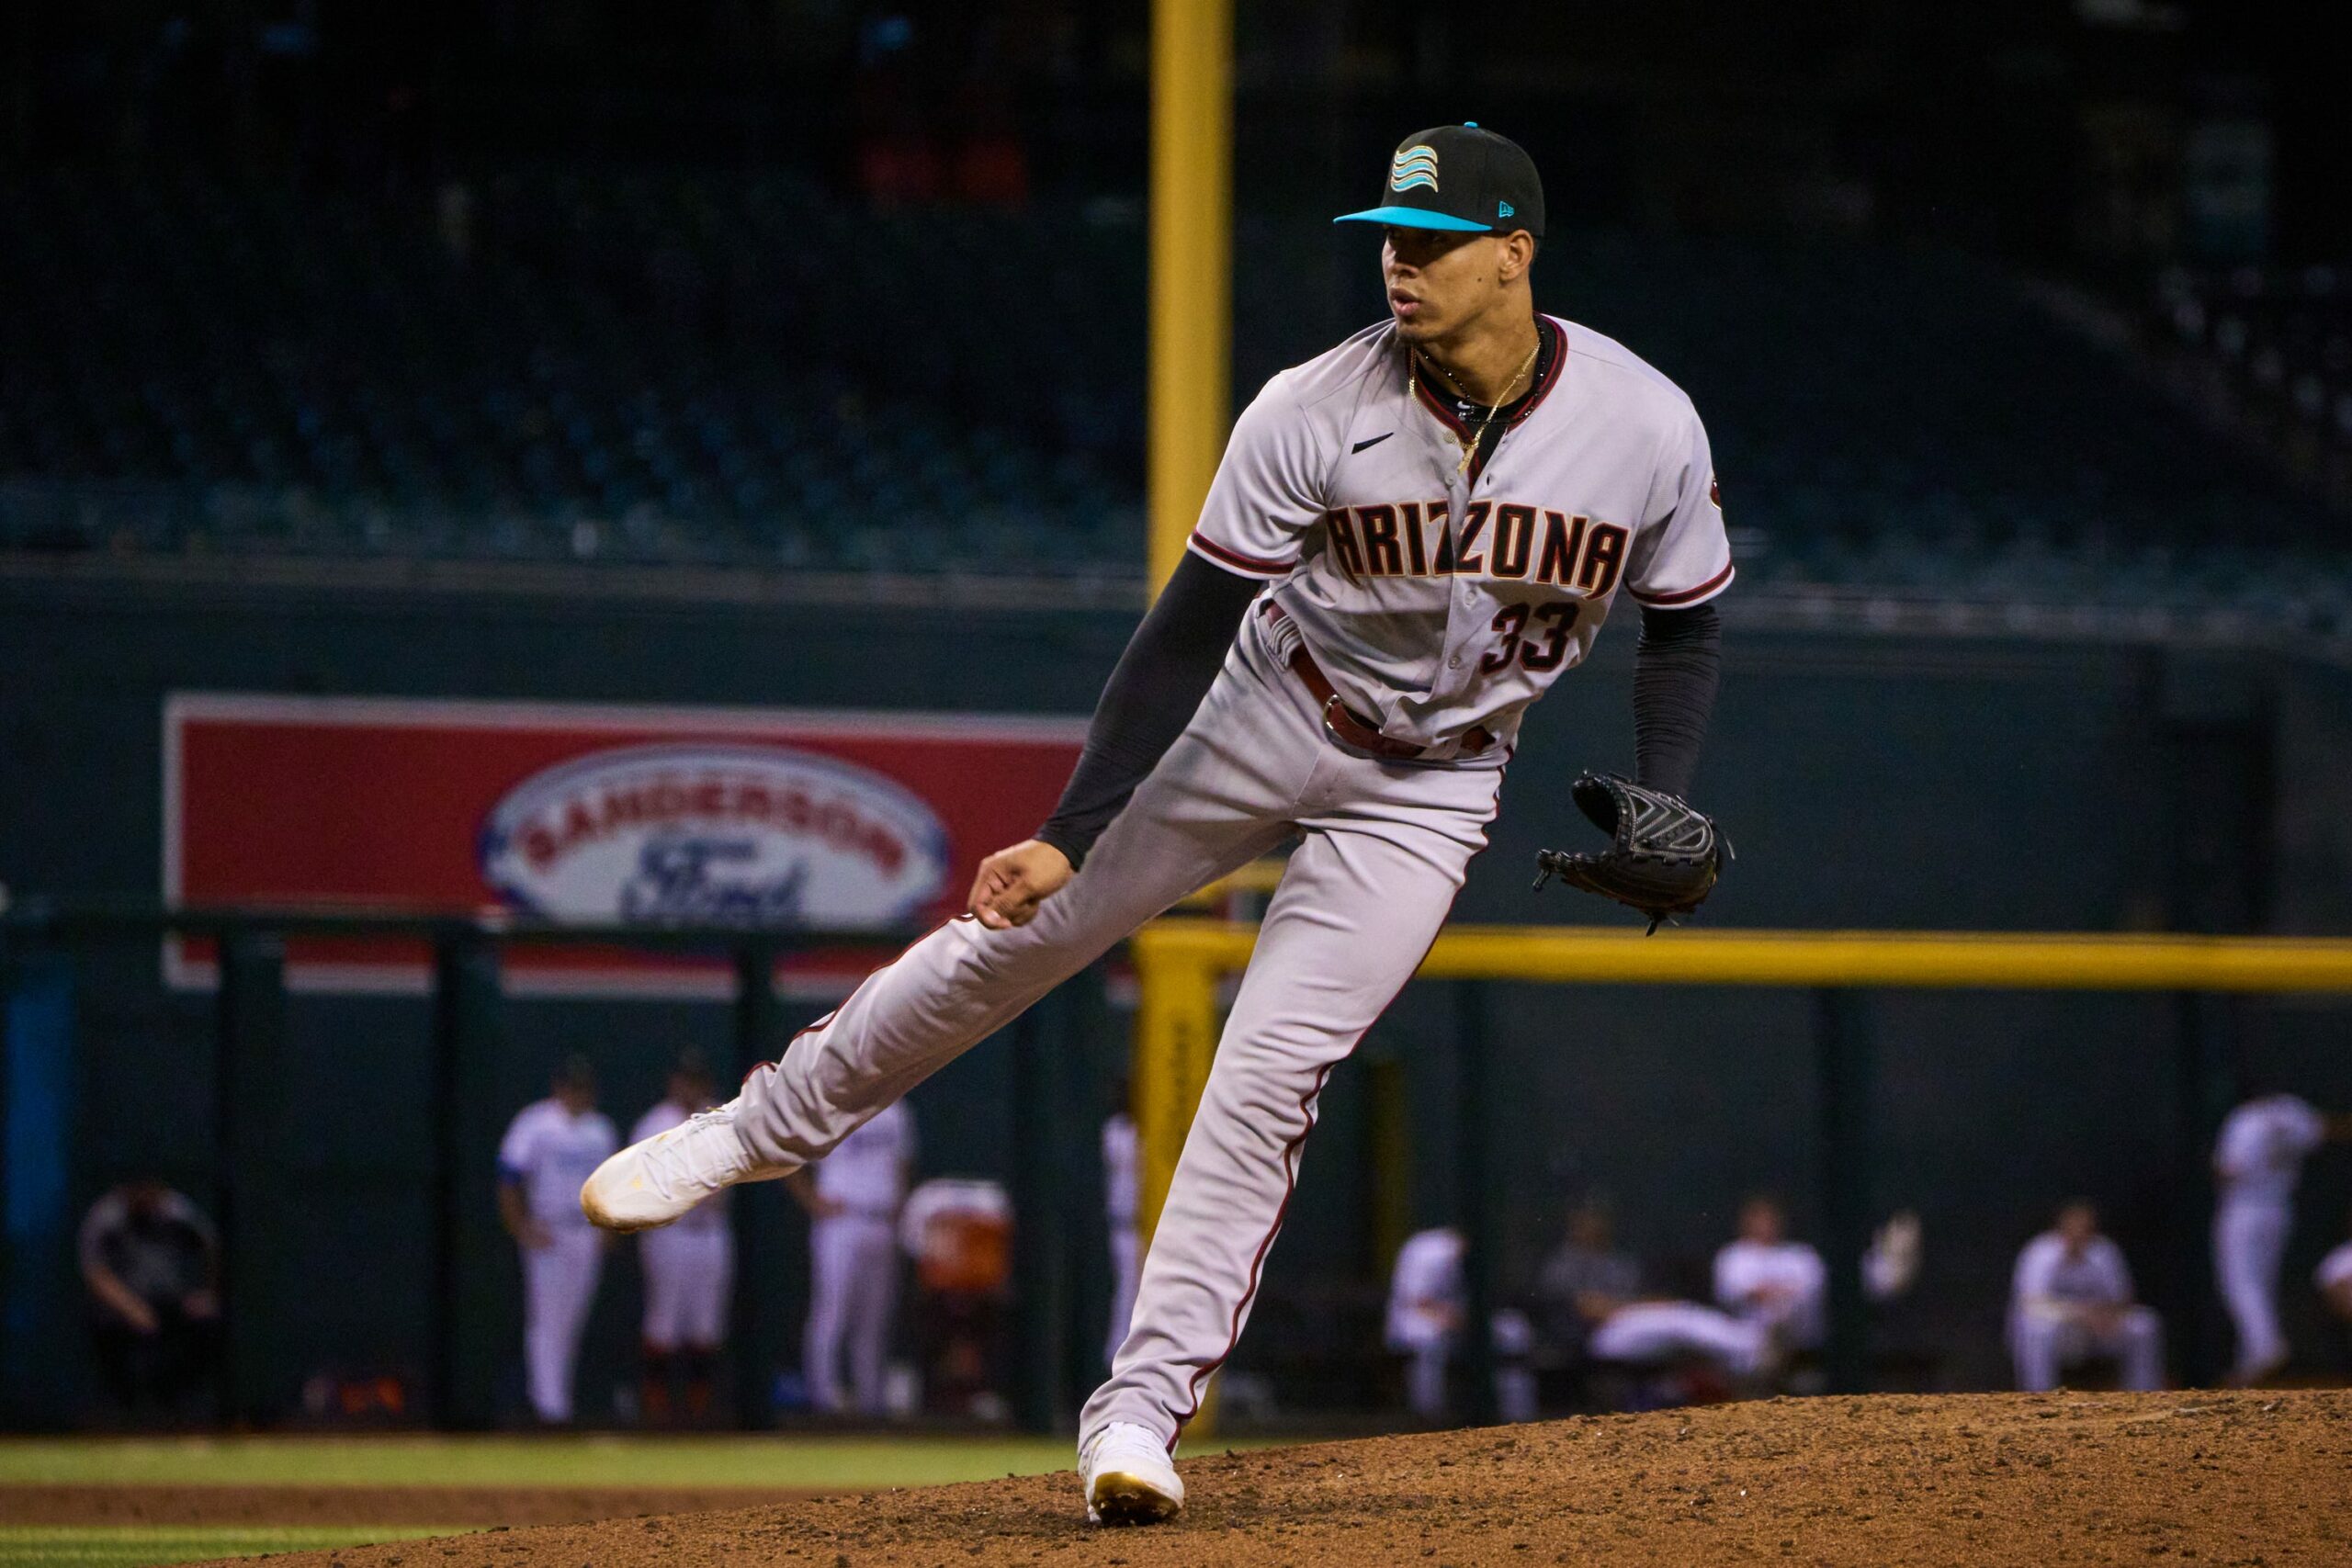 Diamondbacks reliever Justin Martinez pitches in the Arizona Fall League at Chase Field.